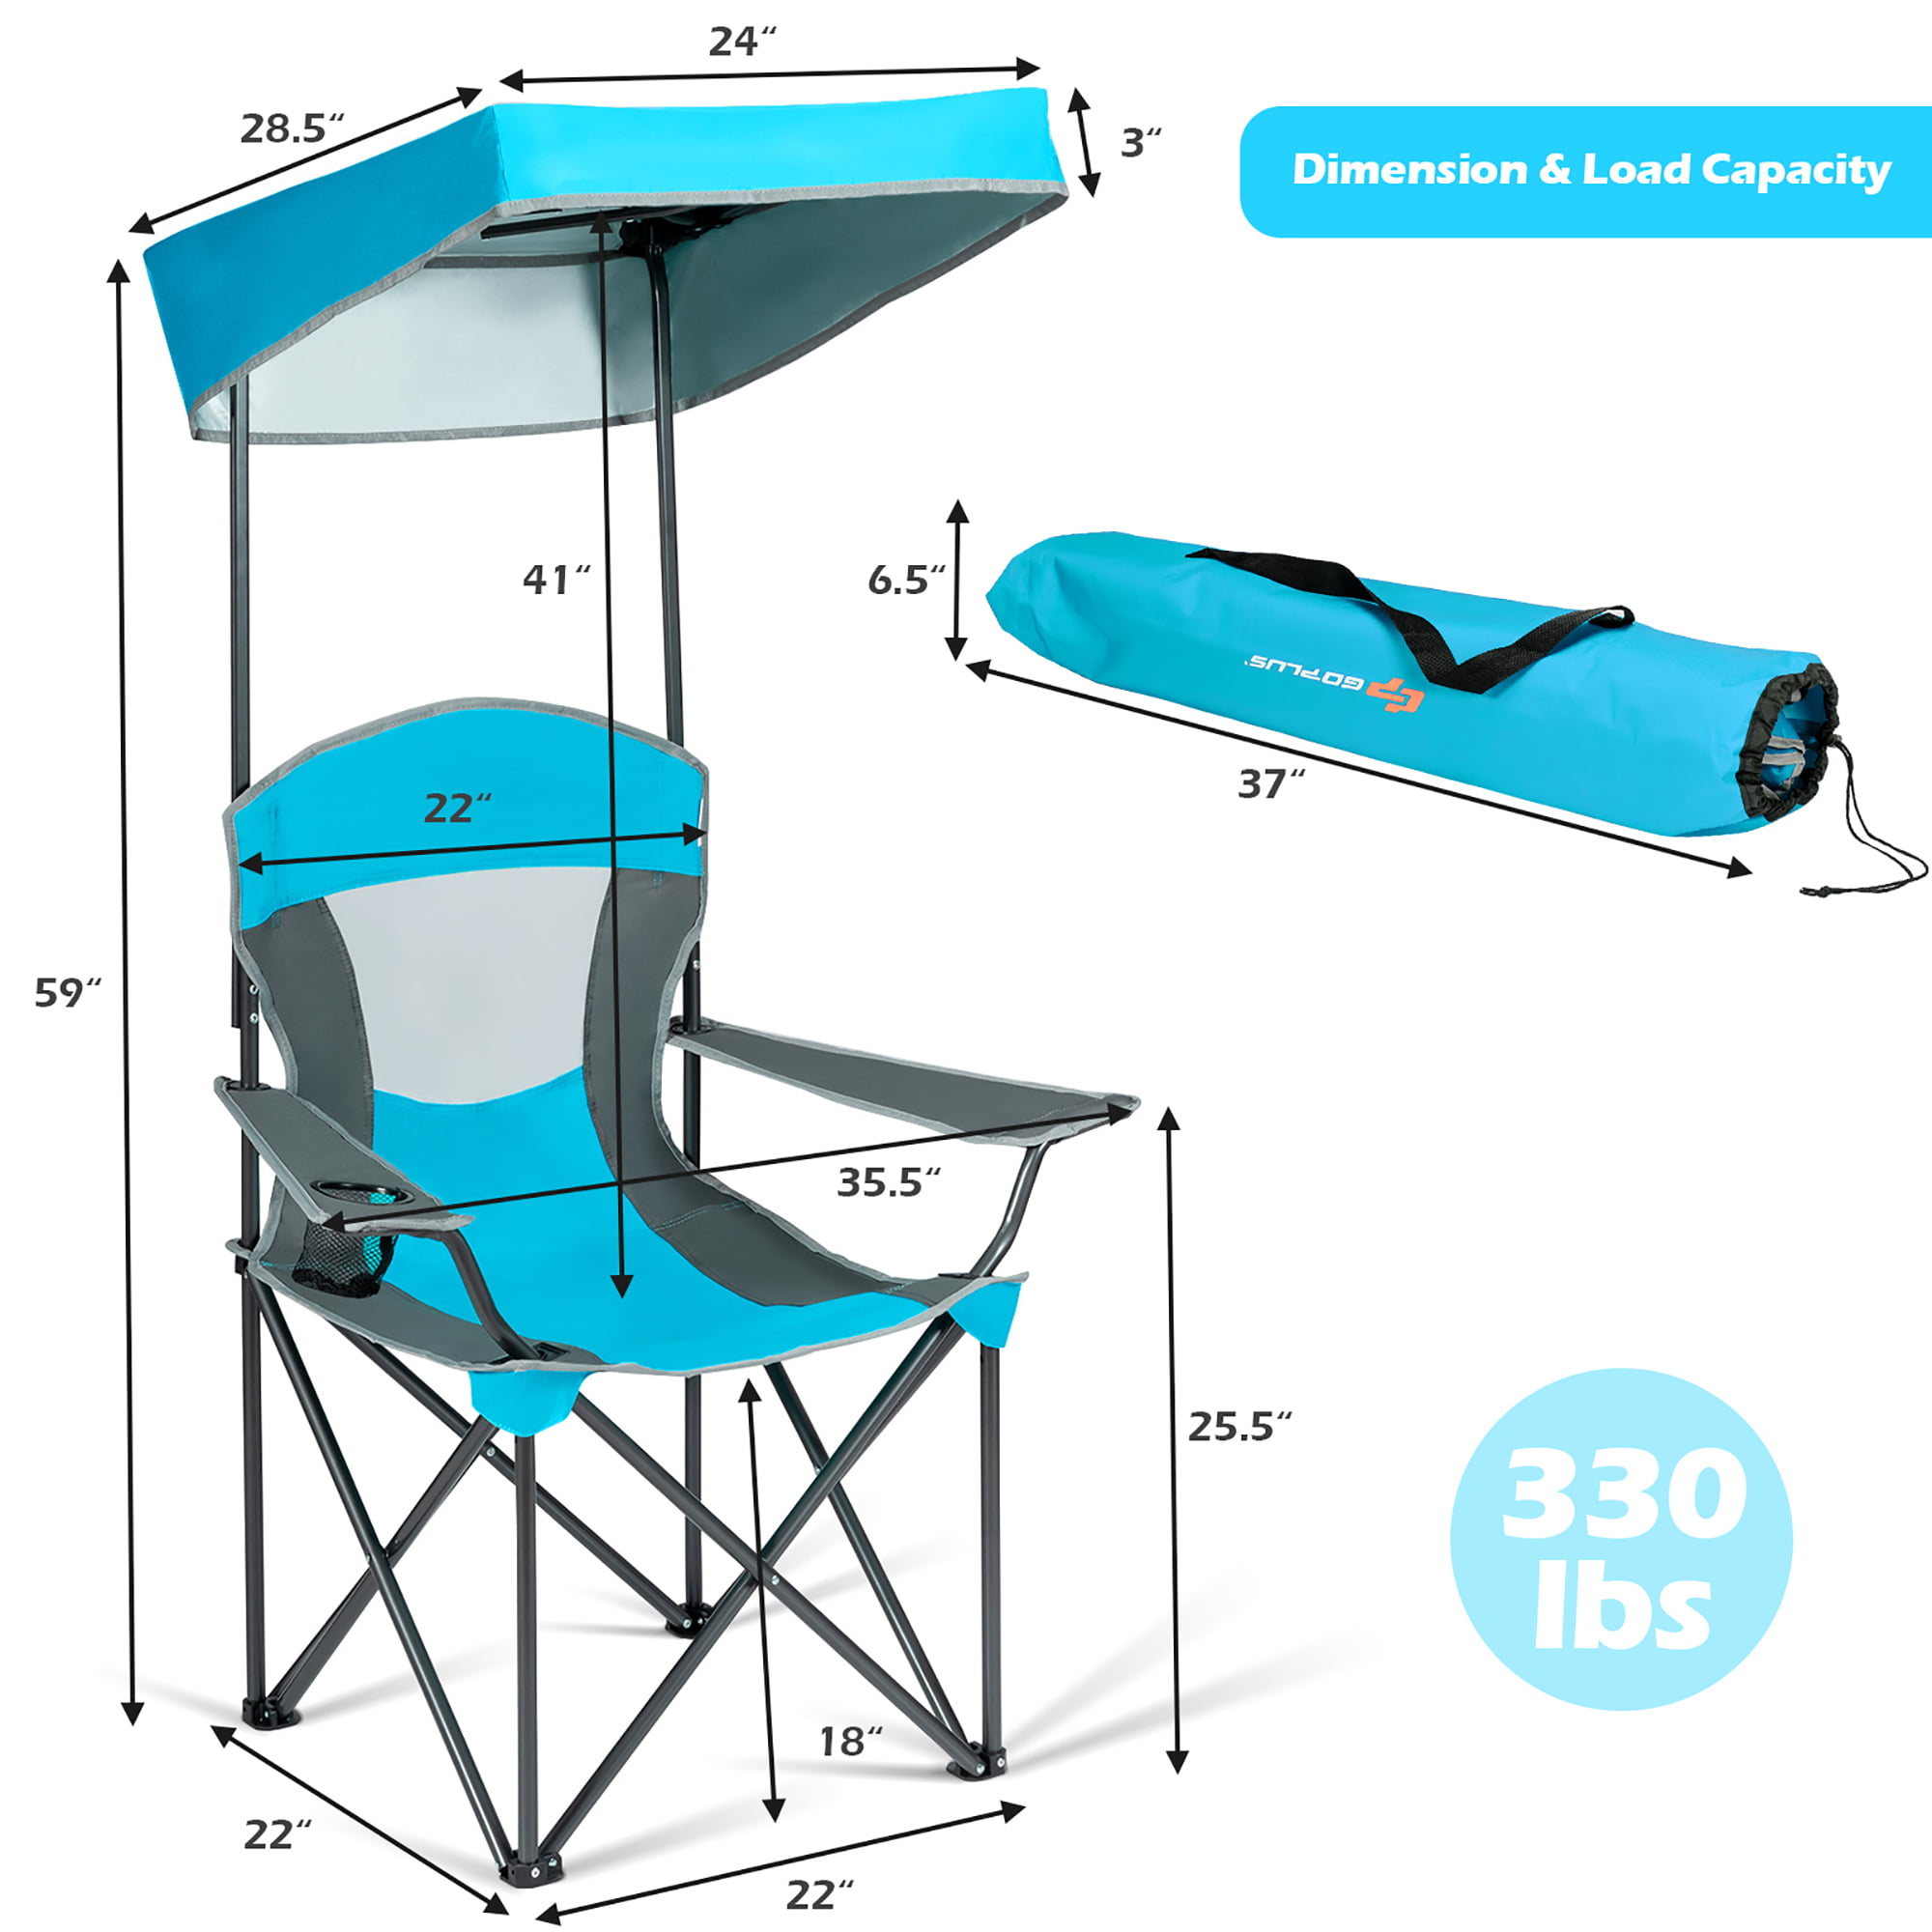 Folding Double Camping Canopy Chairs Beach Chairs, 43% OFF